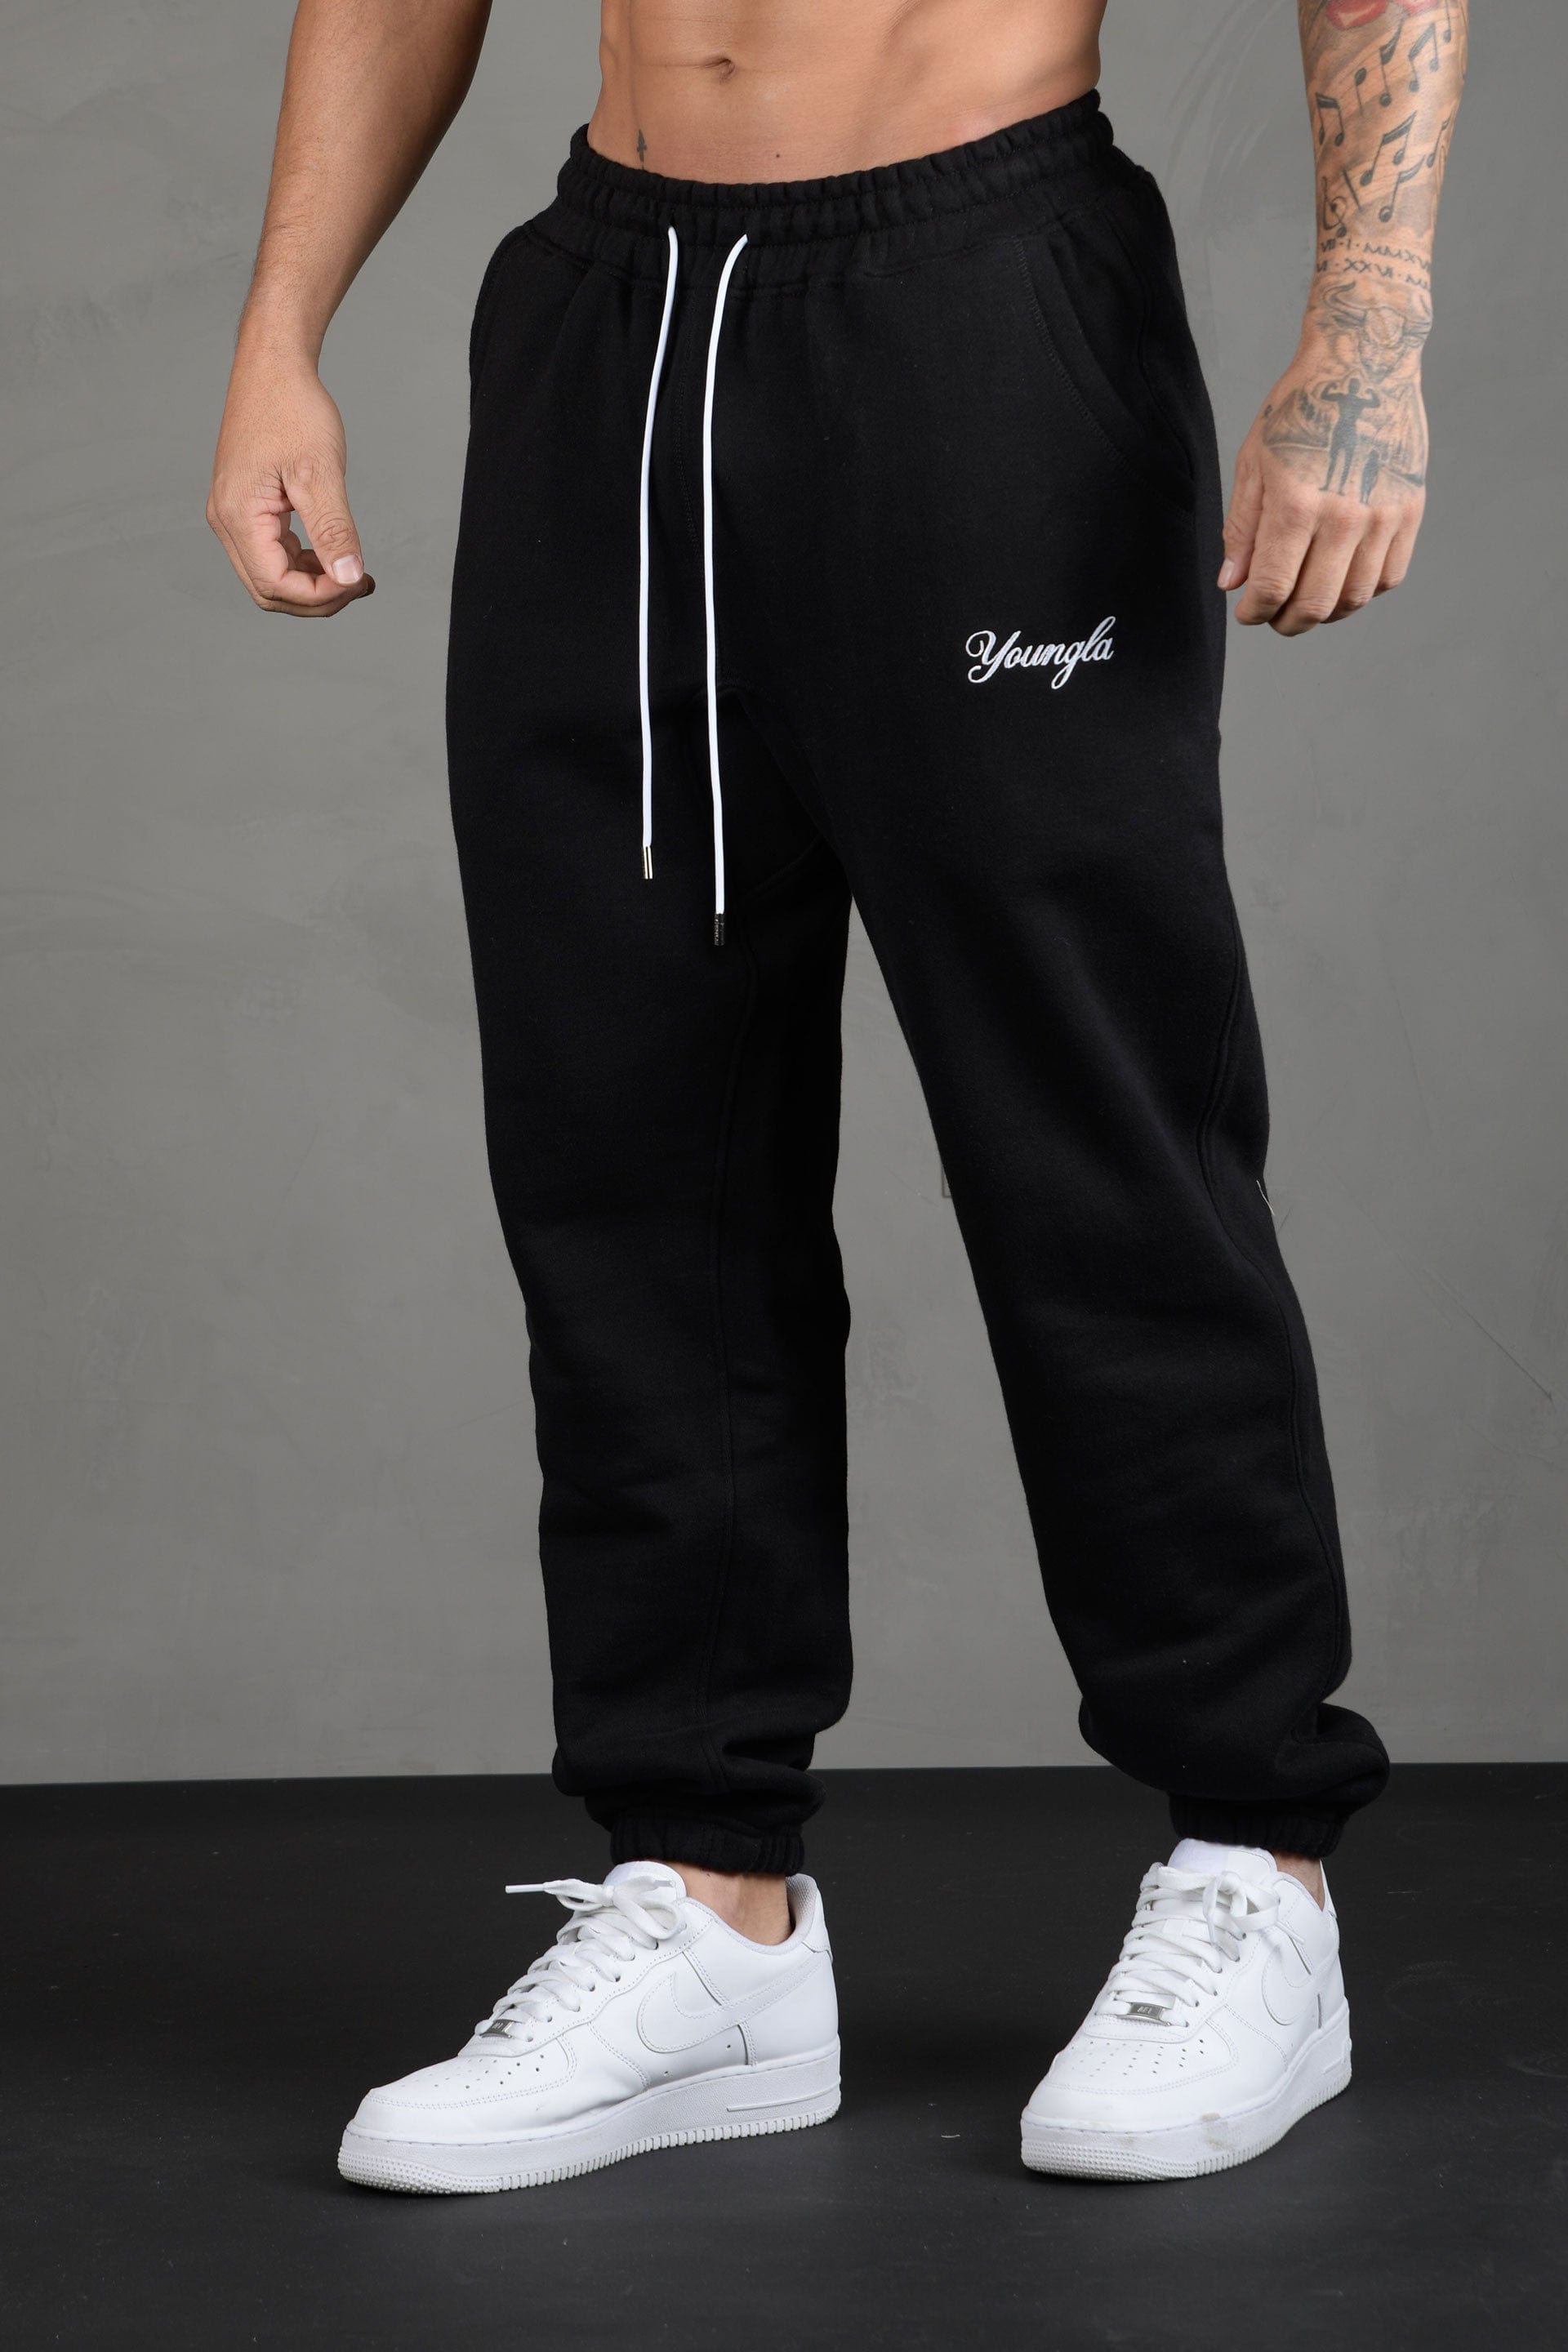 211 For Him Joggers – YoungLA